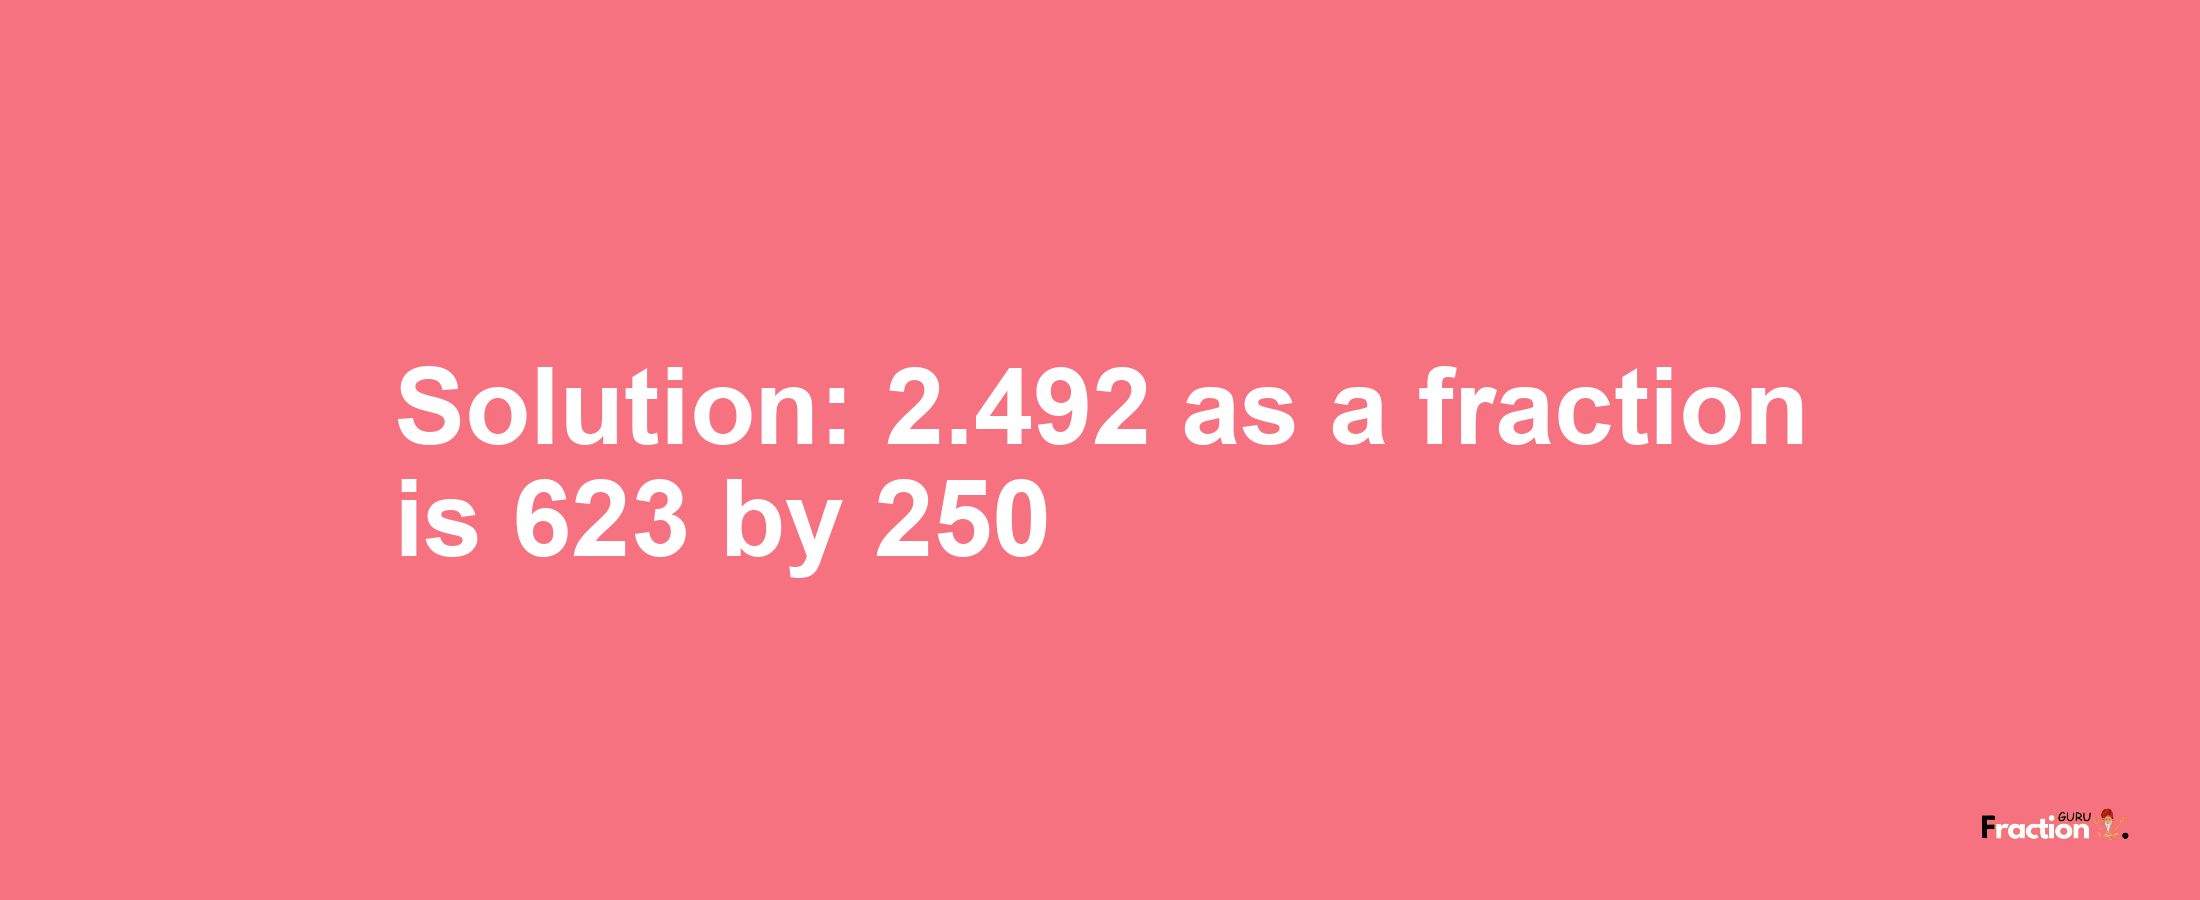 Solution:2.492 as a fraction is 623/250